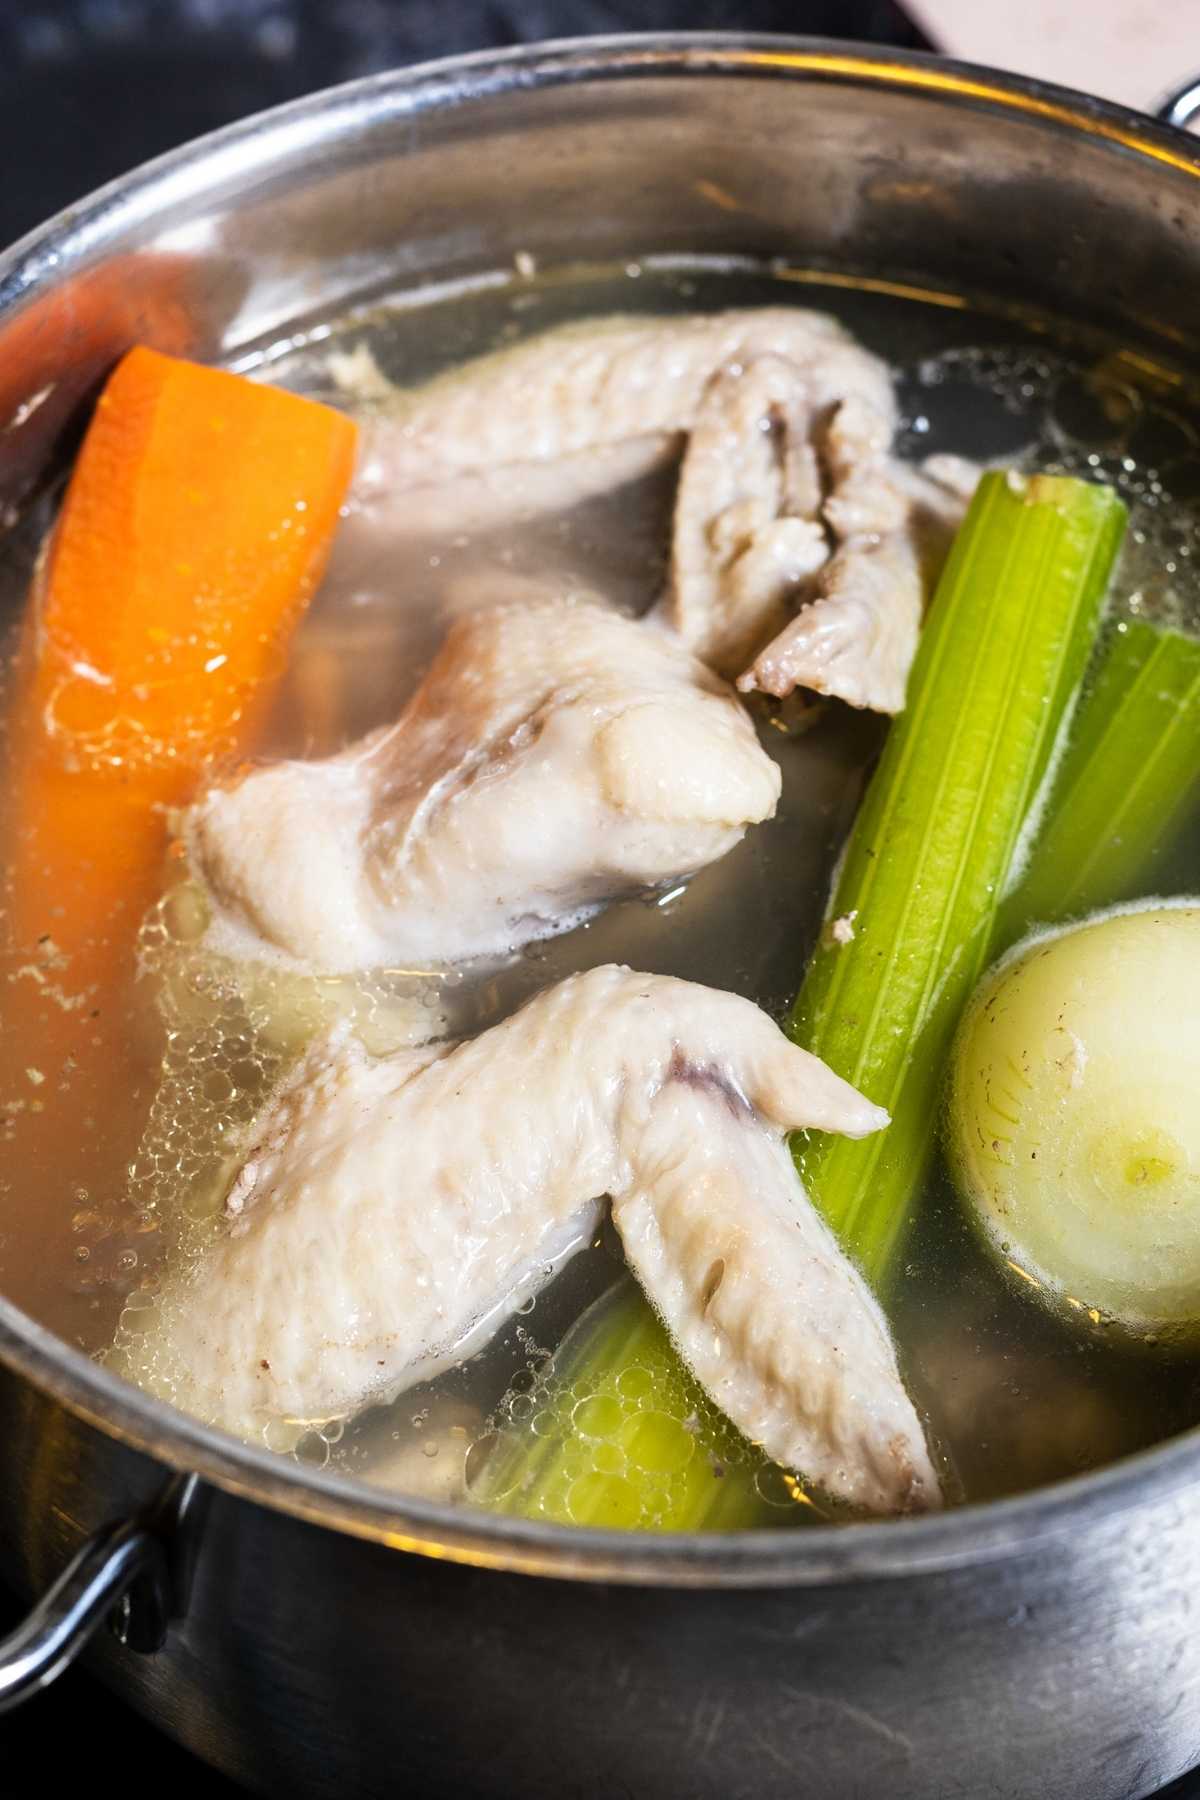 useful if you’re feeding a crowd. In today’s article, we’re sharing some guidelines on how to parboil chicken.